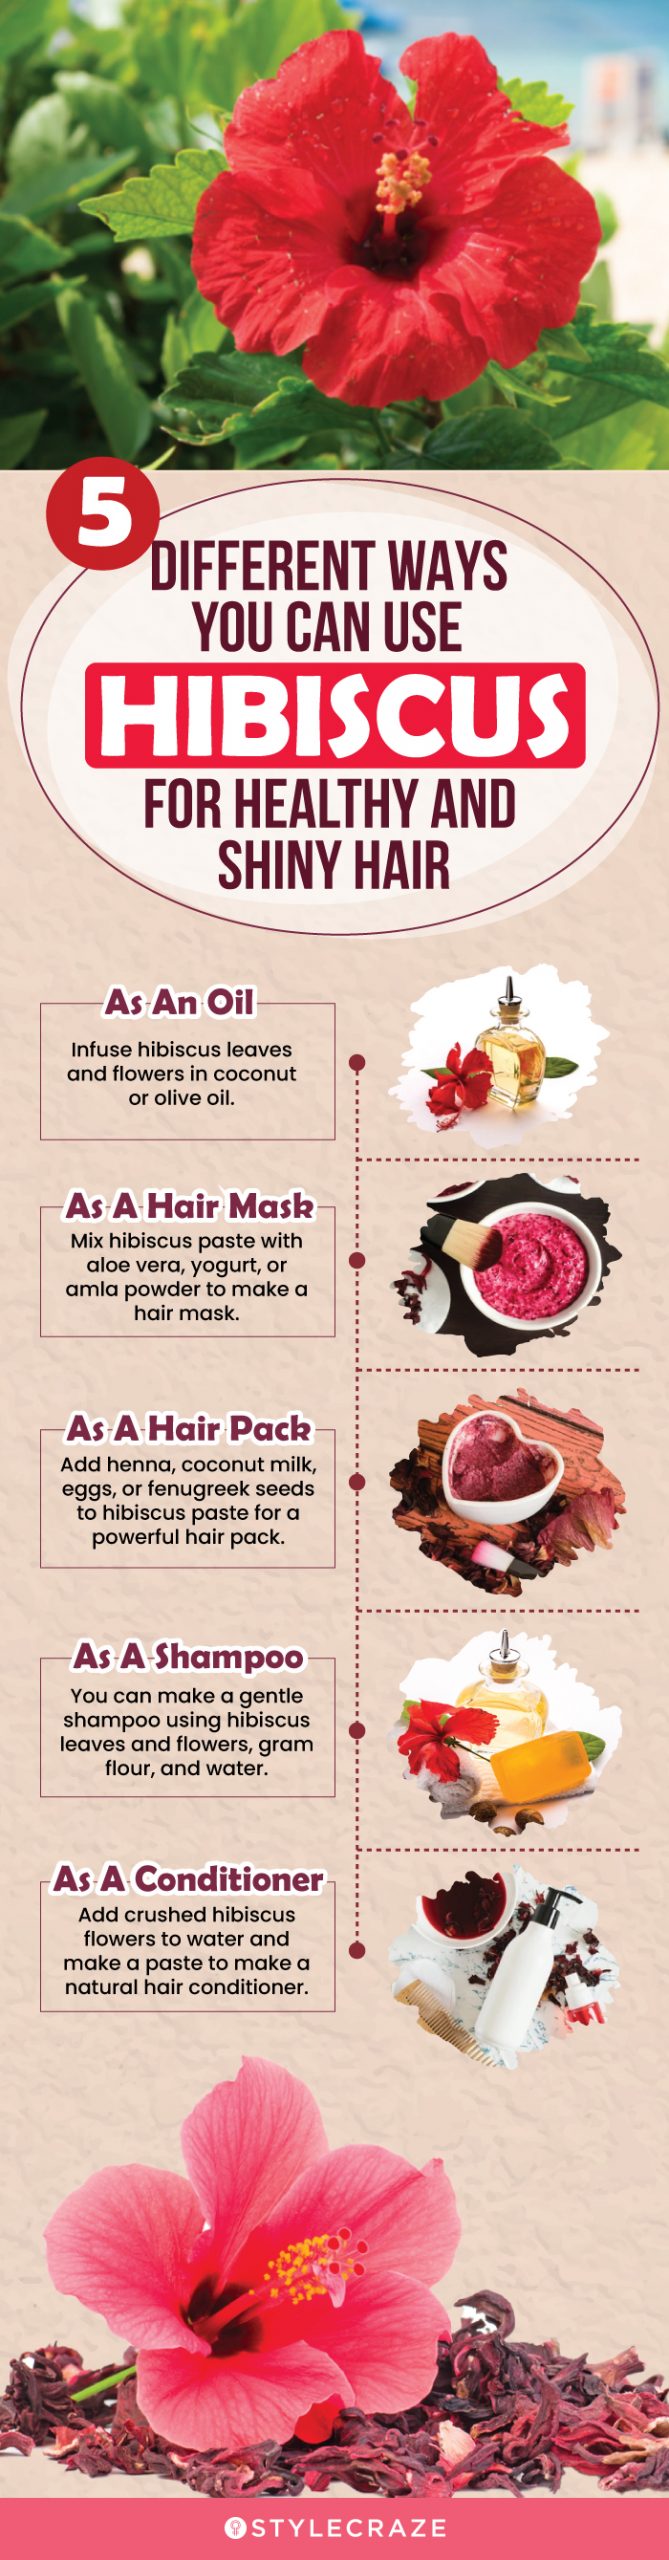 5 different ways you can use hibiscus for healthy and shiny hair [infographic]